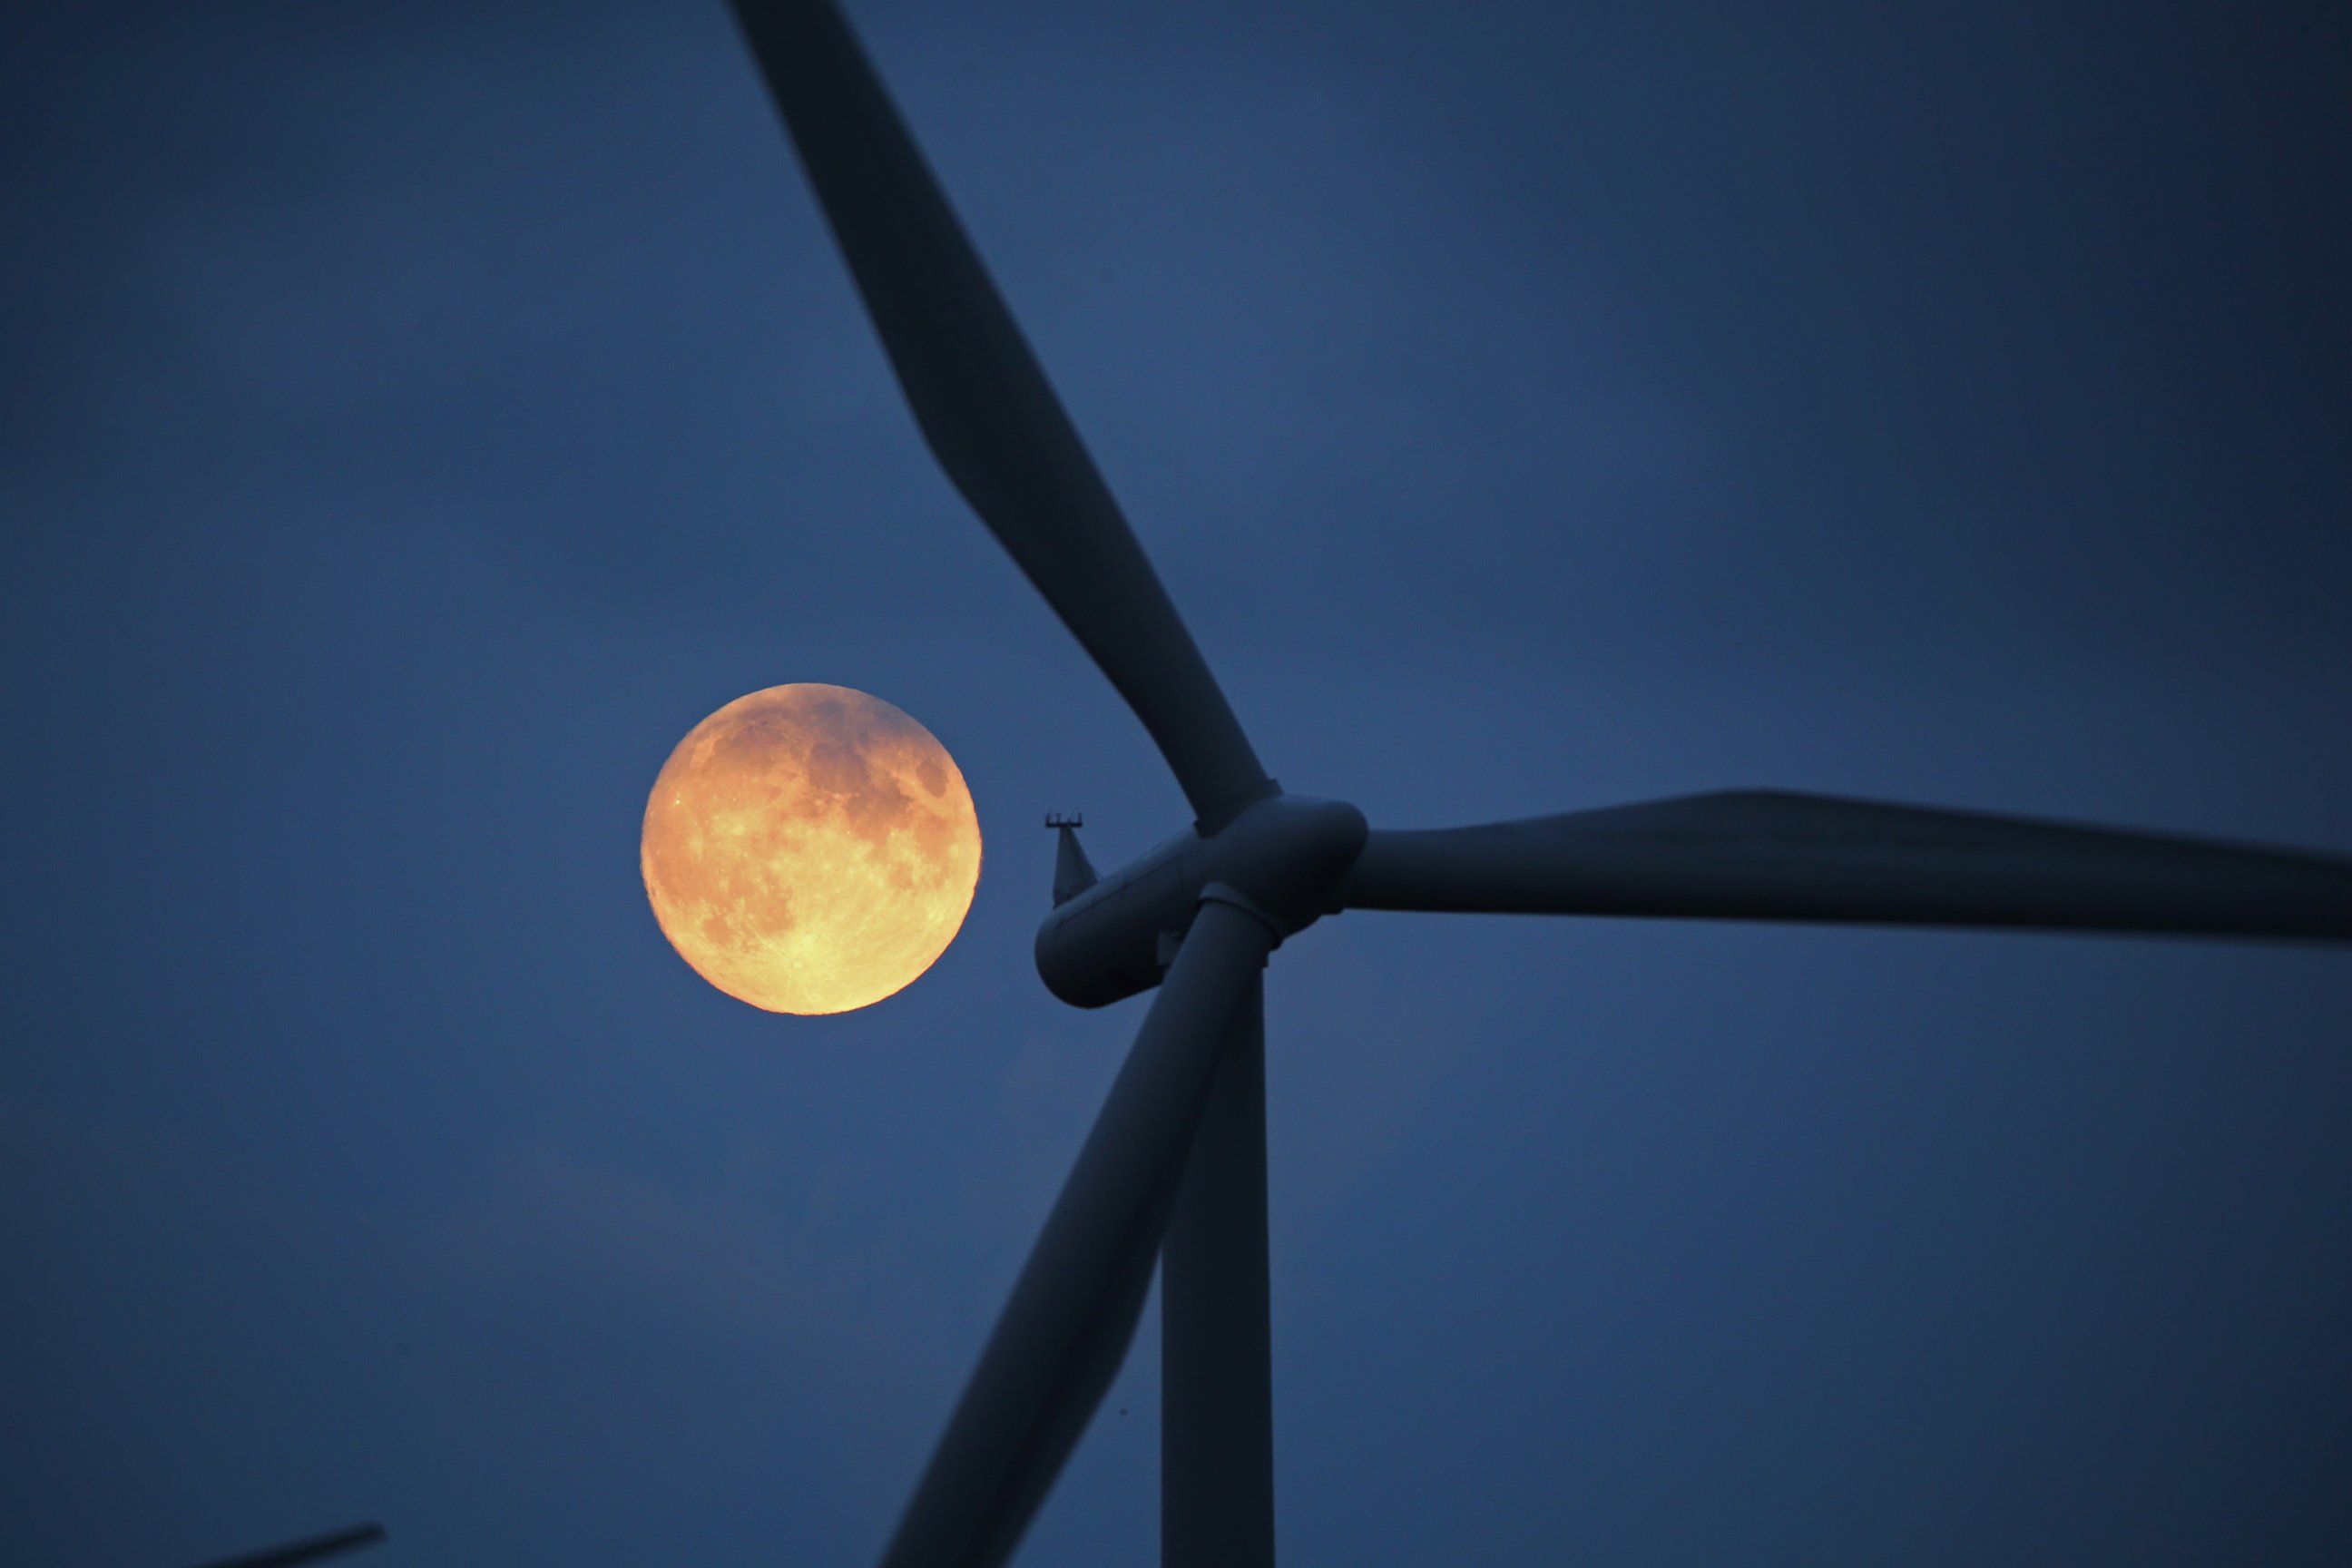 PHOTO: The moon rises behind the turbines of Whitelees Windfarm, Oct. 7, 2014, in Glasgow, Scotland.